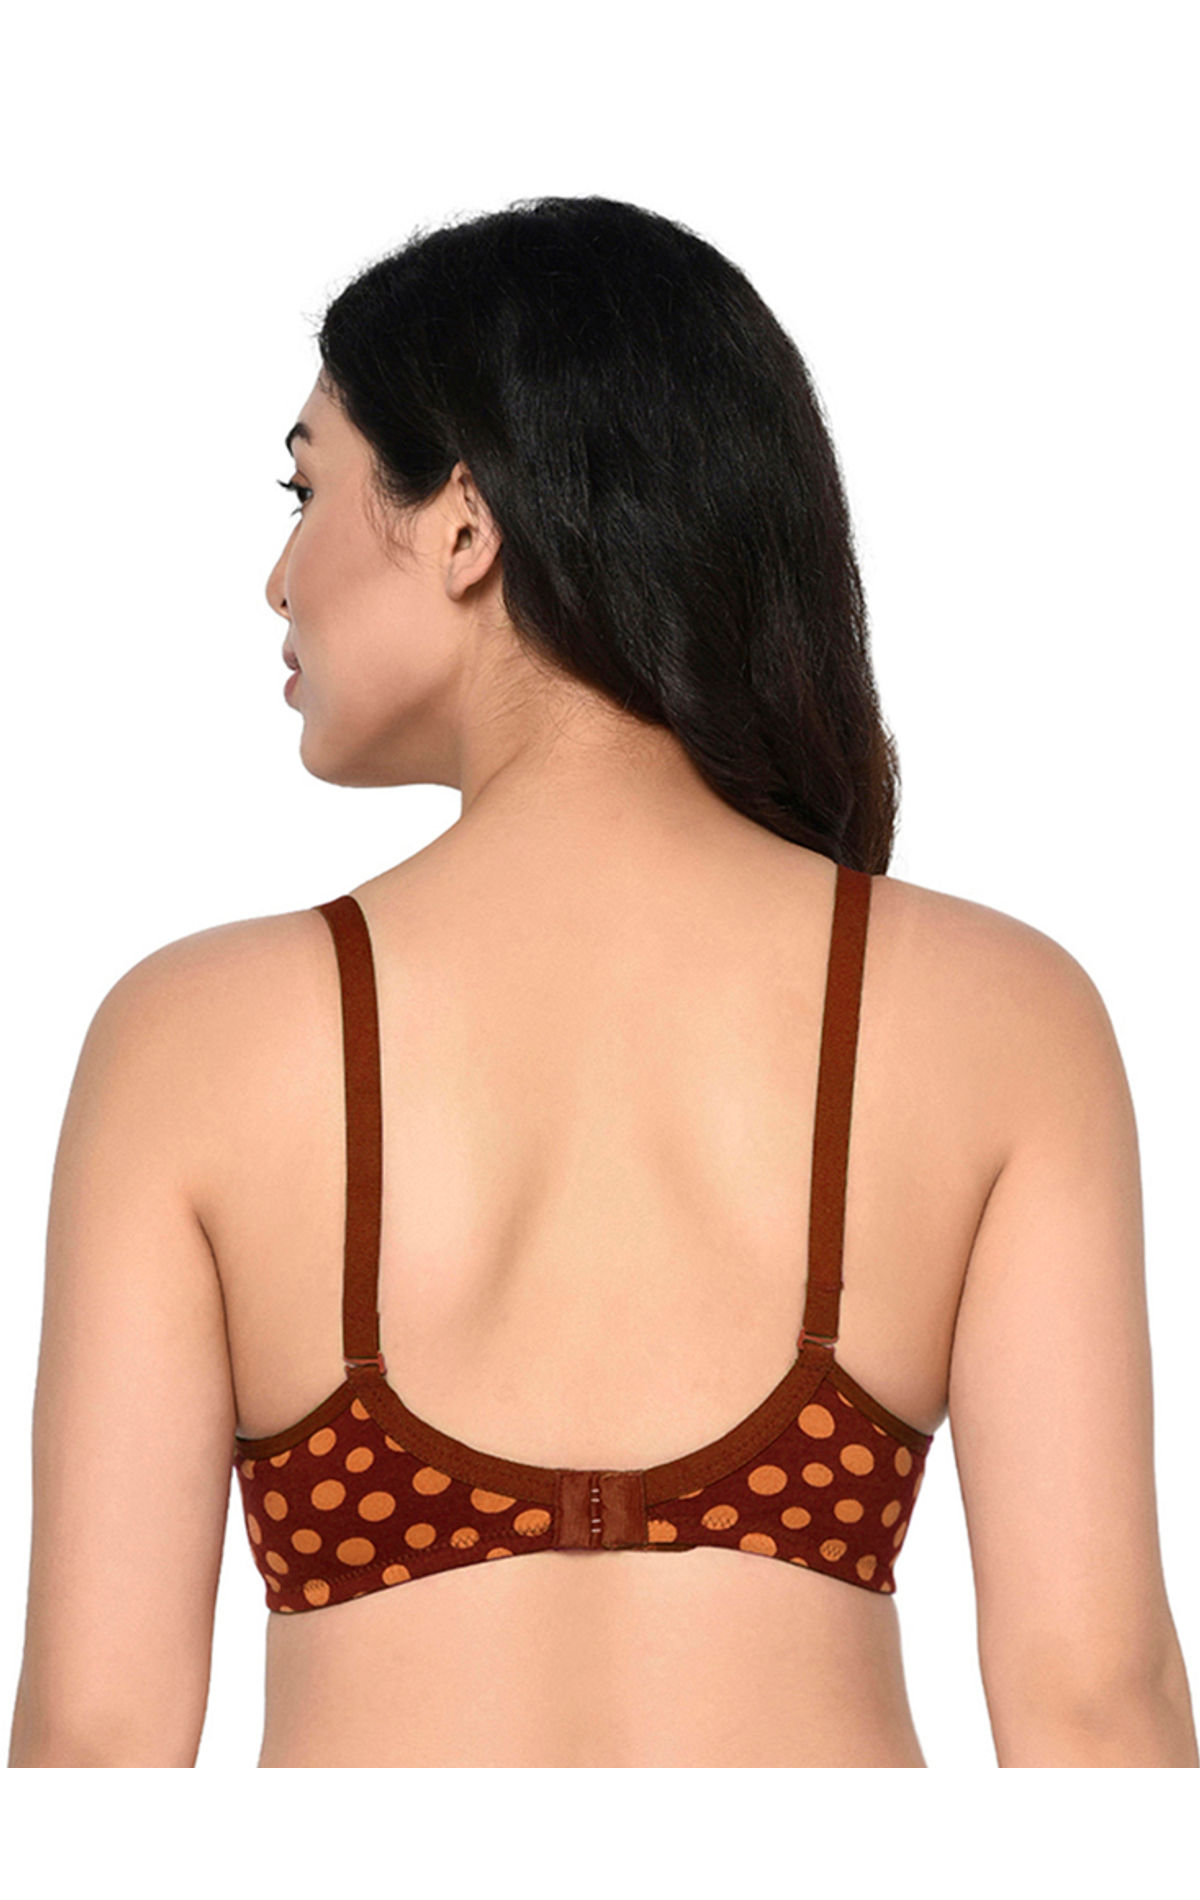 BODYCARE 1525 Cotton, Polyester Perfect Full Coverage Seamed Bra (34B) in  Chandigarh at best price by Jain General Store - Justdial